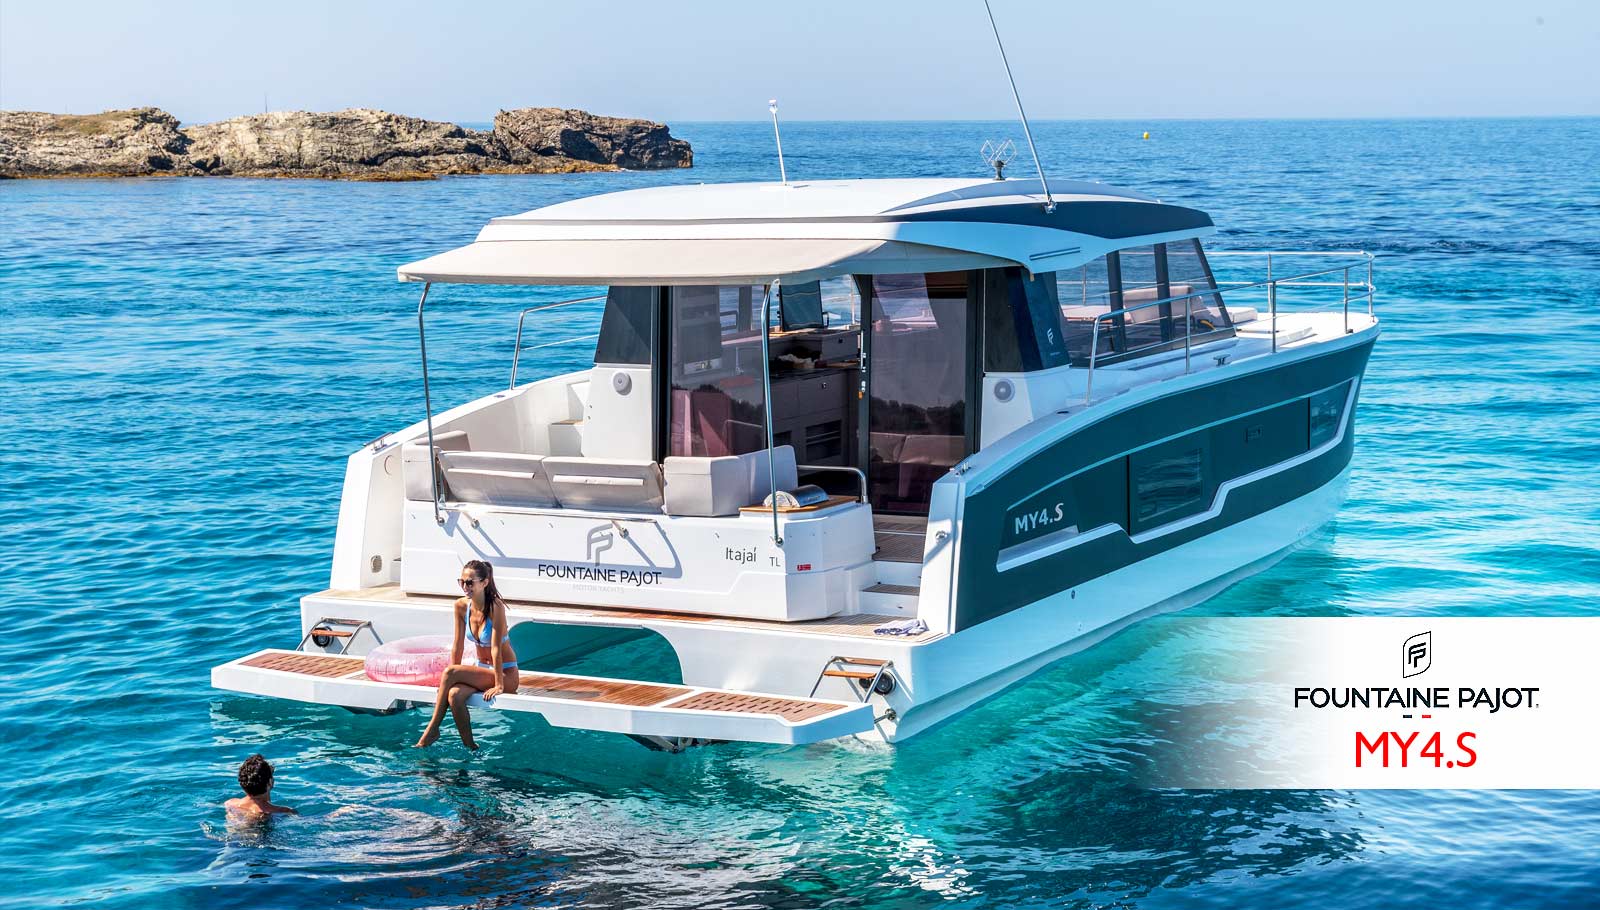 Motor Yachts Fountaine Pajot MY4.S